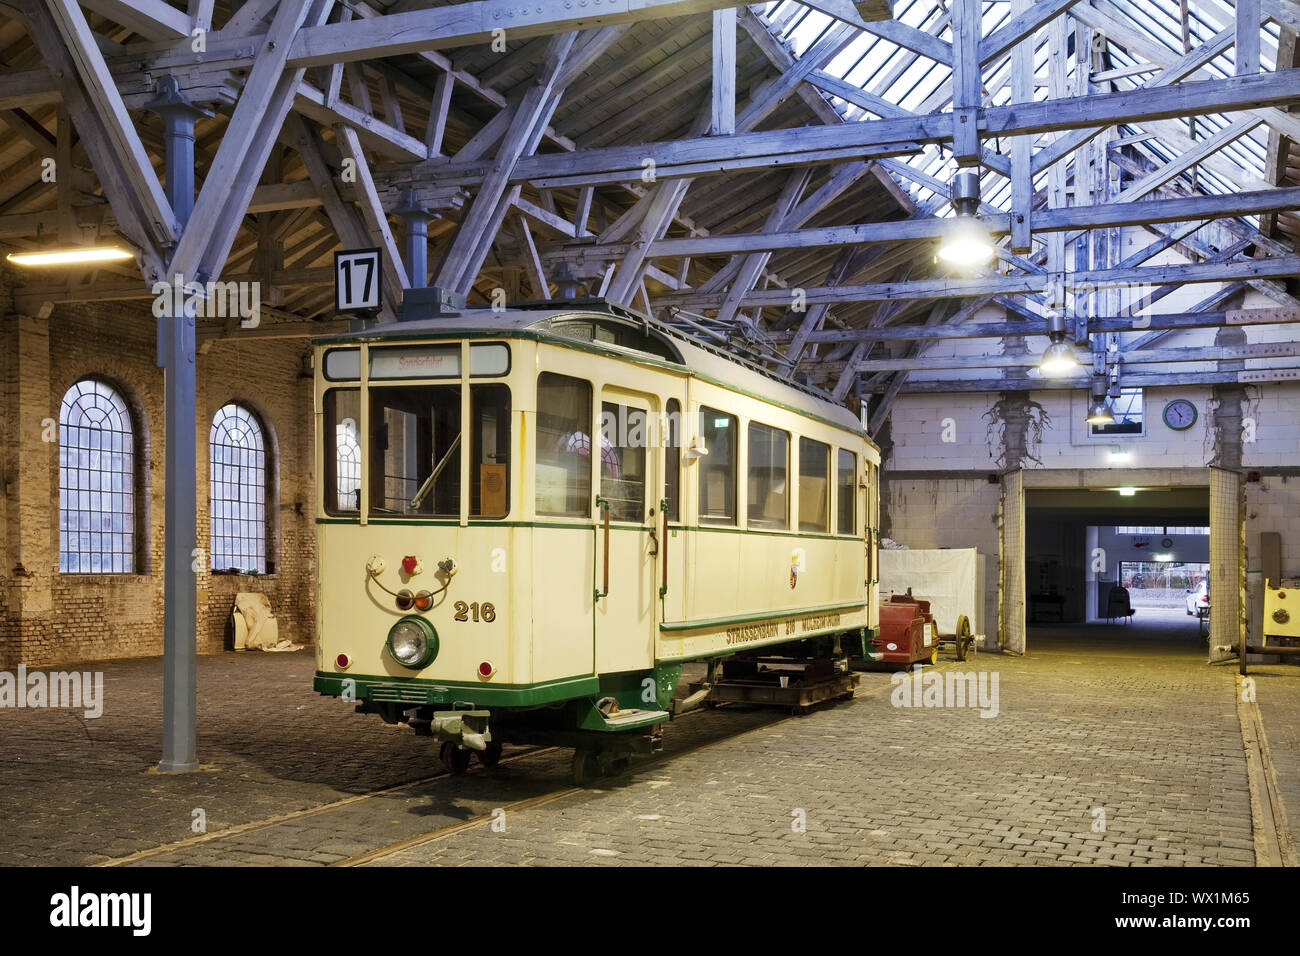 Old turning shop, interior view with old streetcar, Mulheim an der Ruhr, Germany, Europe Stock Photo